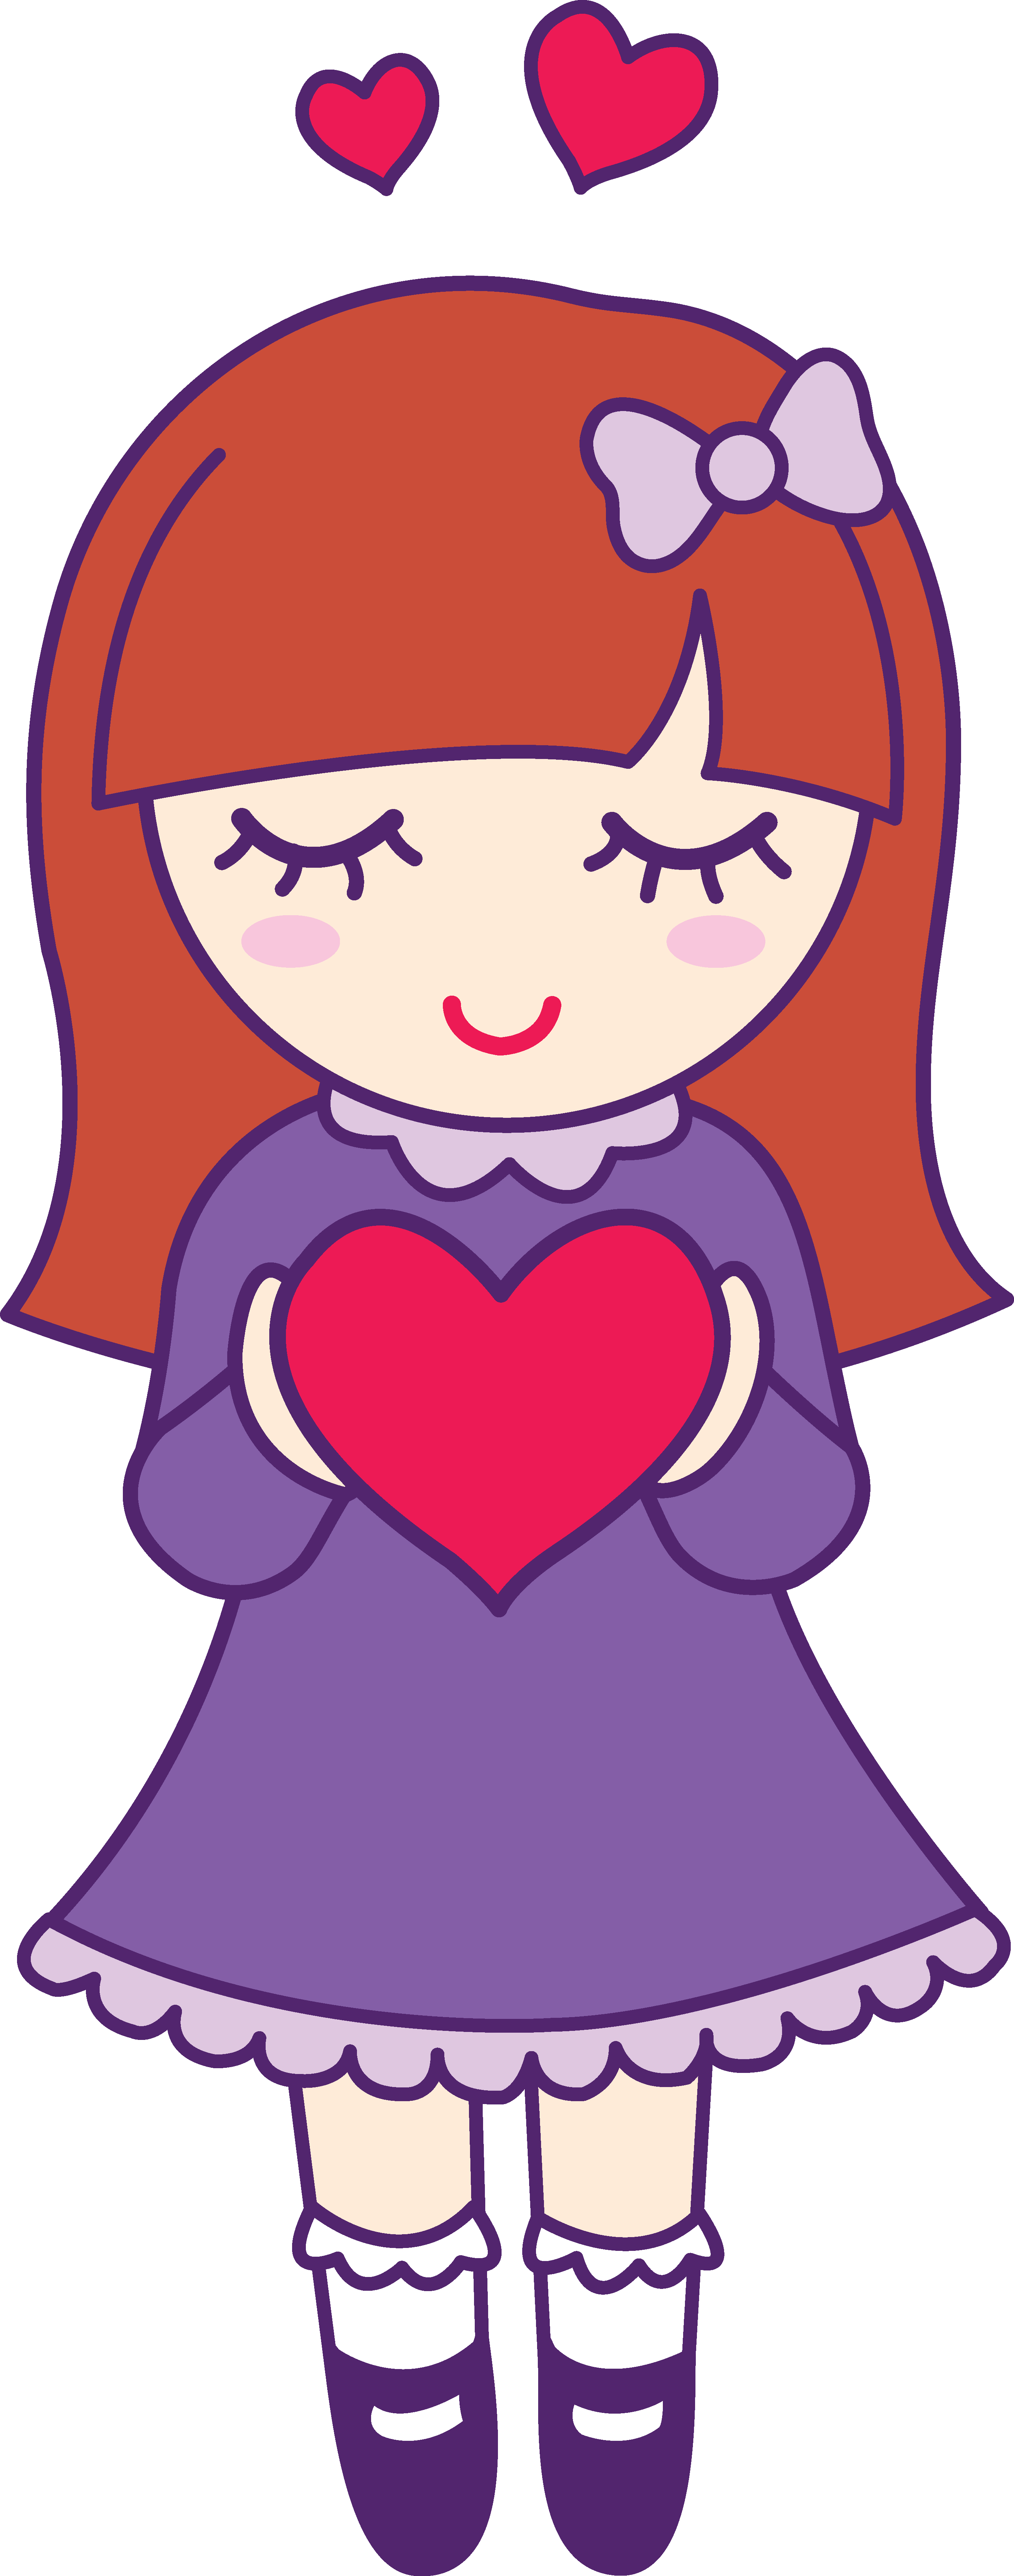 Images of cute girls clipart - ClipartFox